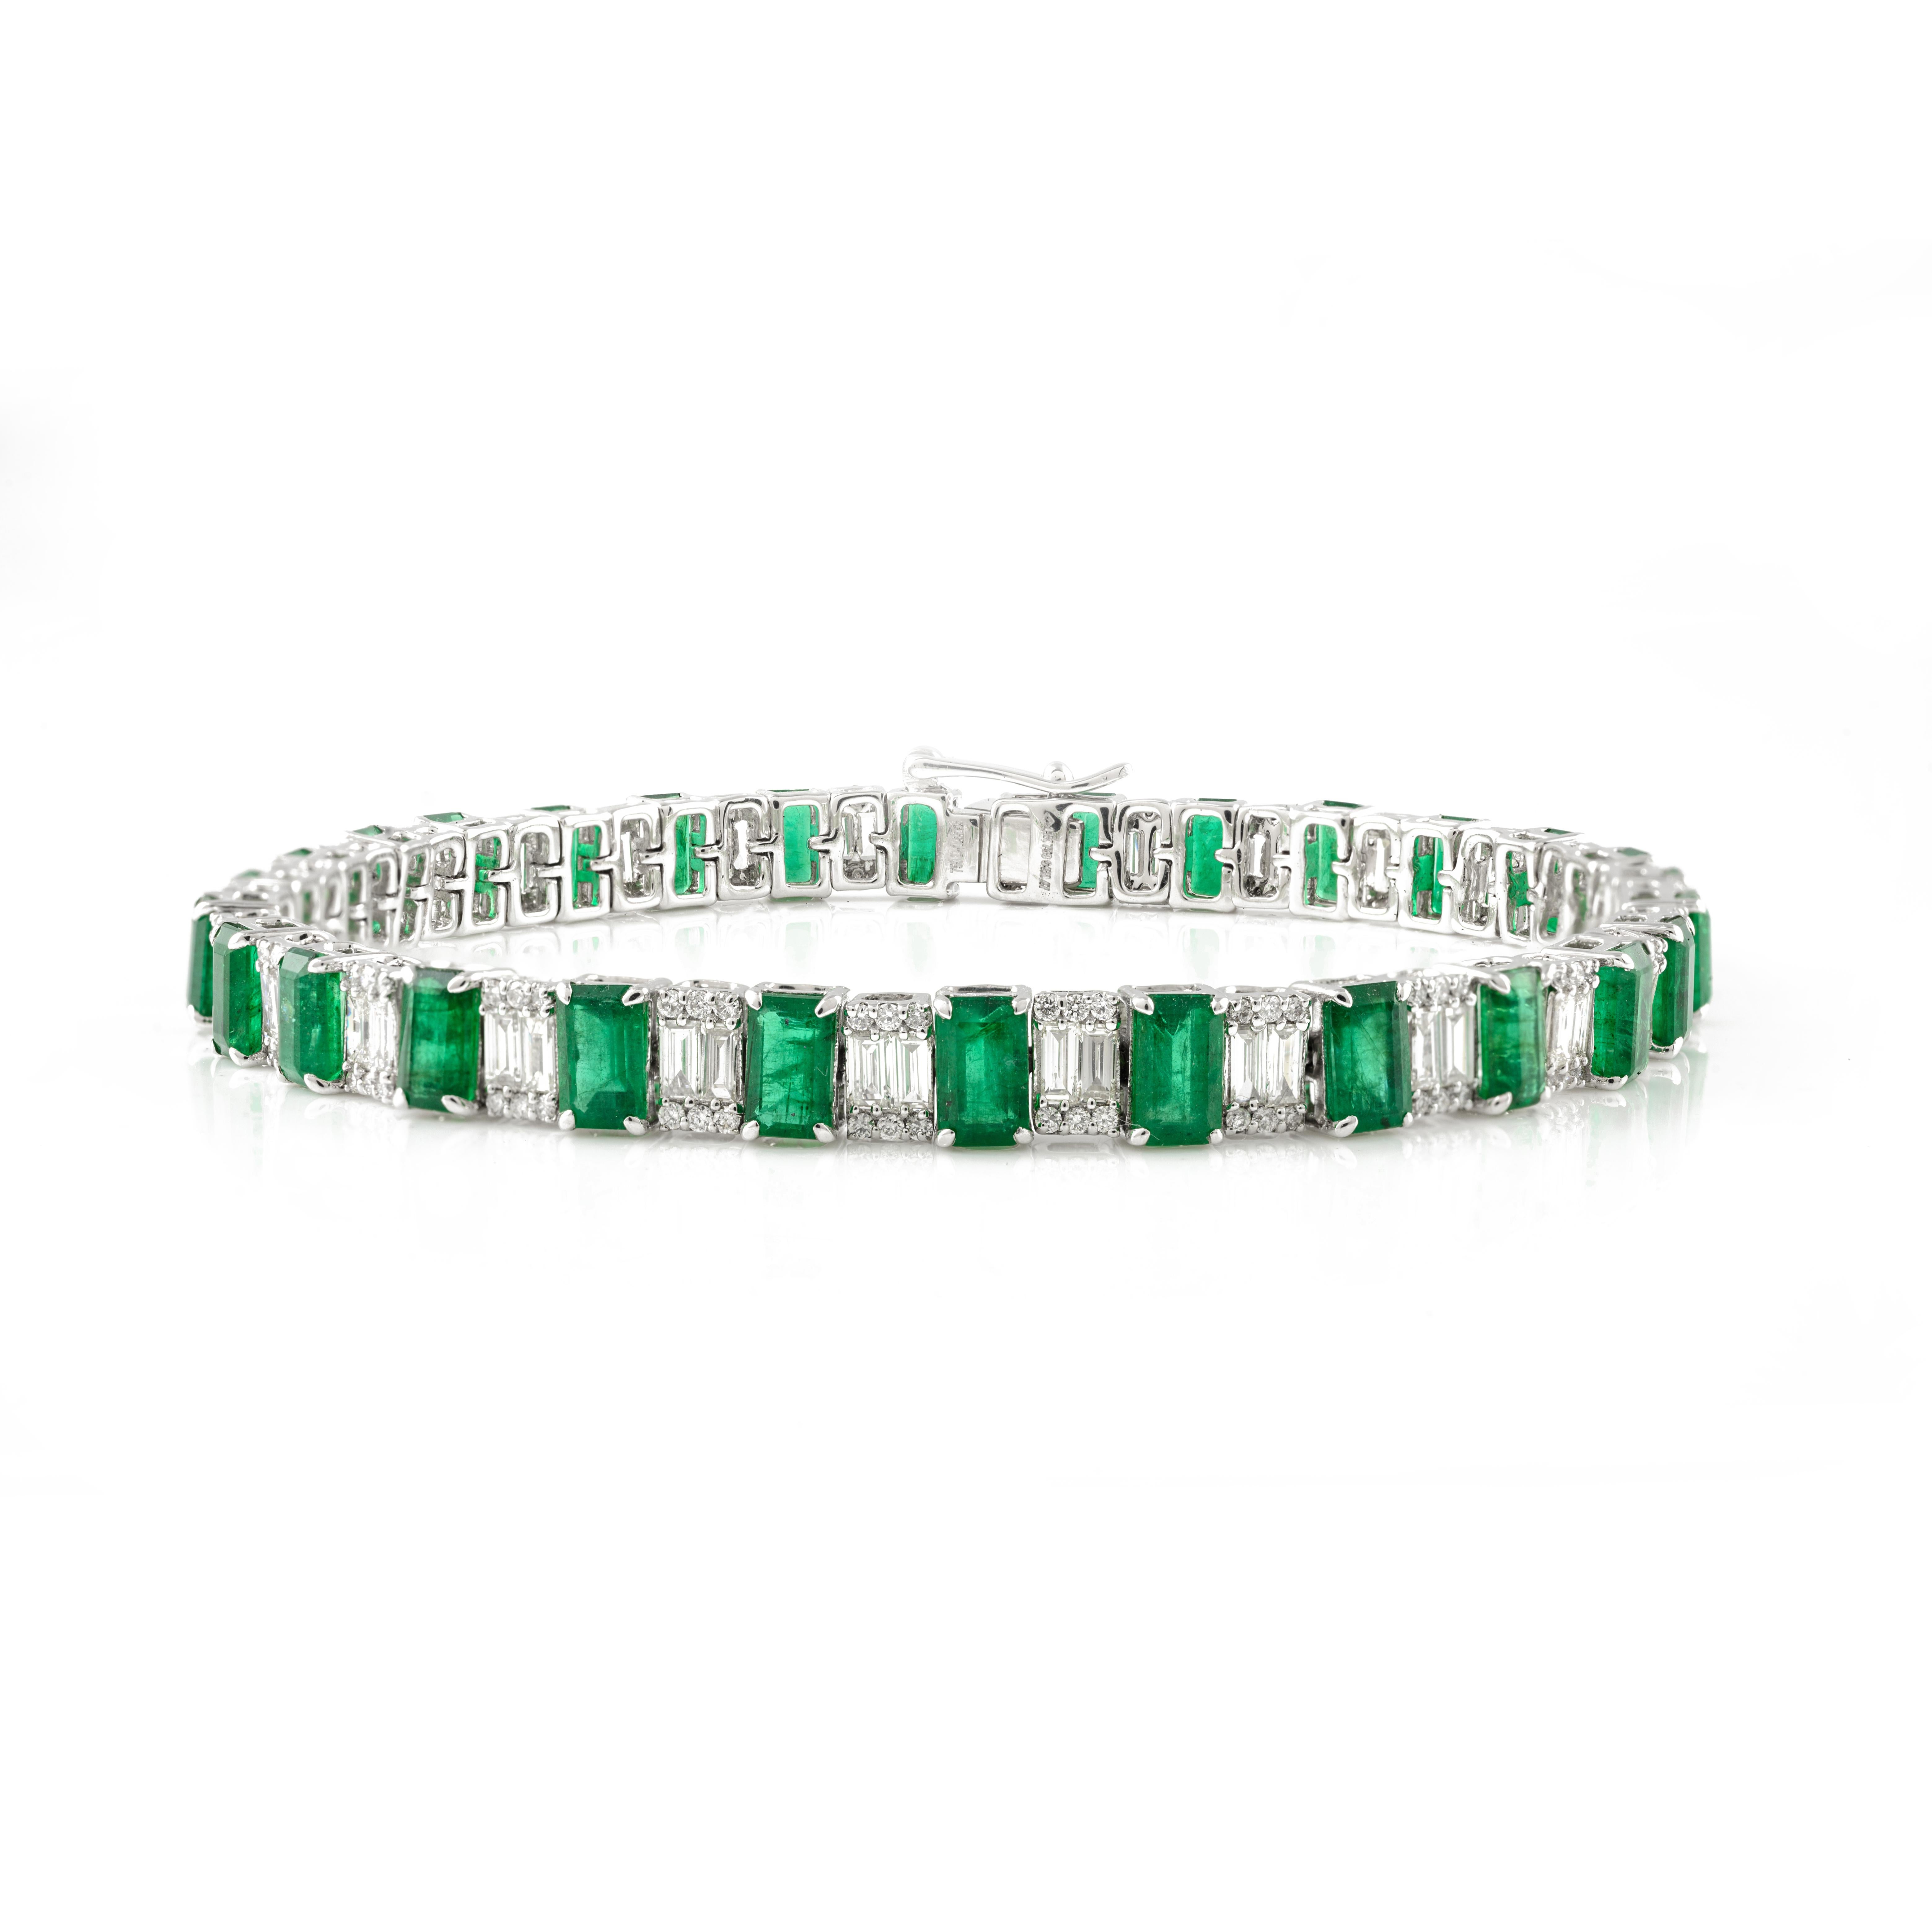 This Natural Emerald Tennis Bracelet in 18K gold with Diamond showcases 28 endlessly sparkling natural emerald, weighing 7.86 carats and 224 pieces of diamonds weighing 2.01 carats. It measures 7 inches long in length. 
Emerald enhances intellectual